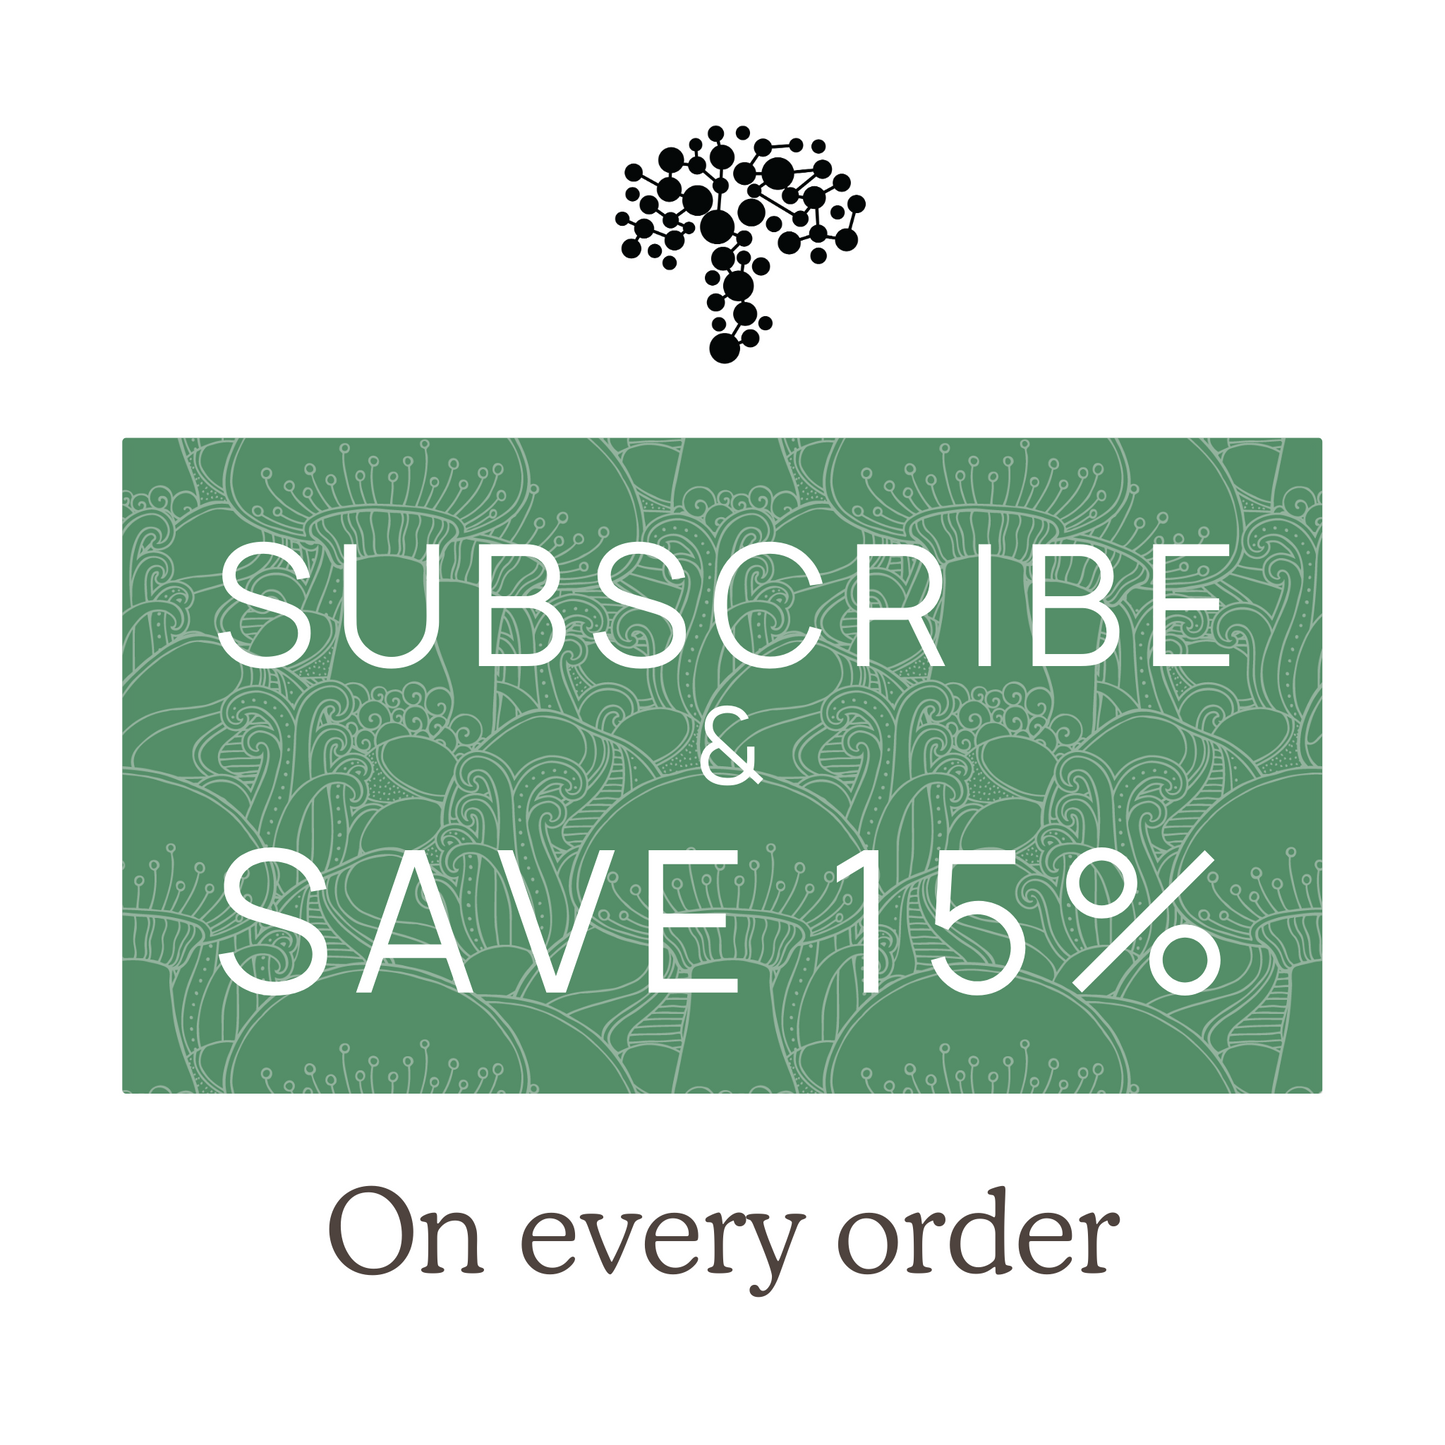 Subscribe & save 15% on every Real Mushrooms order.